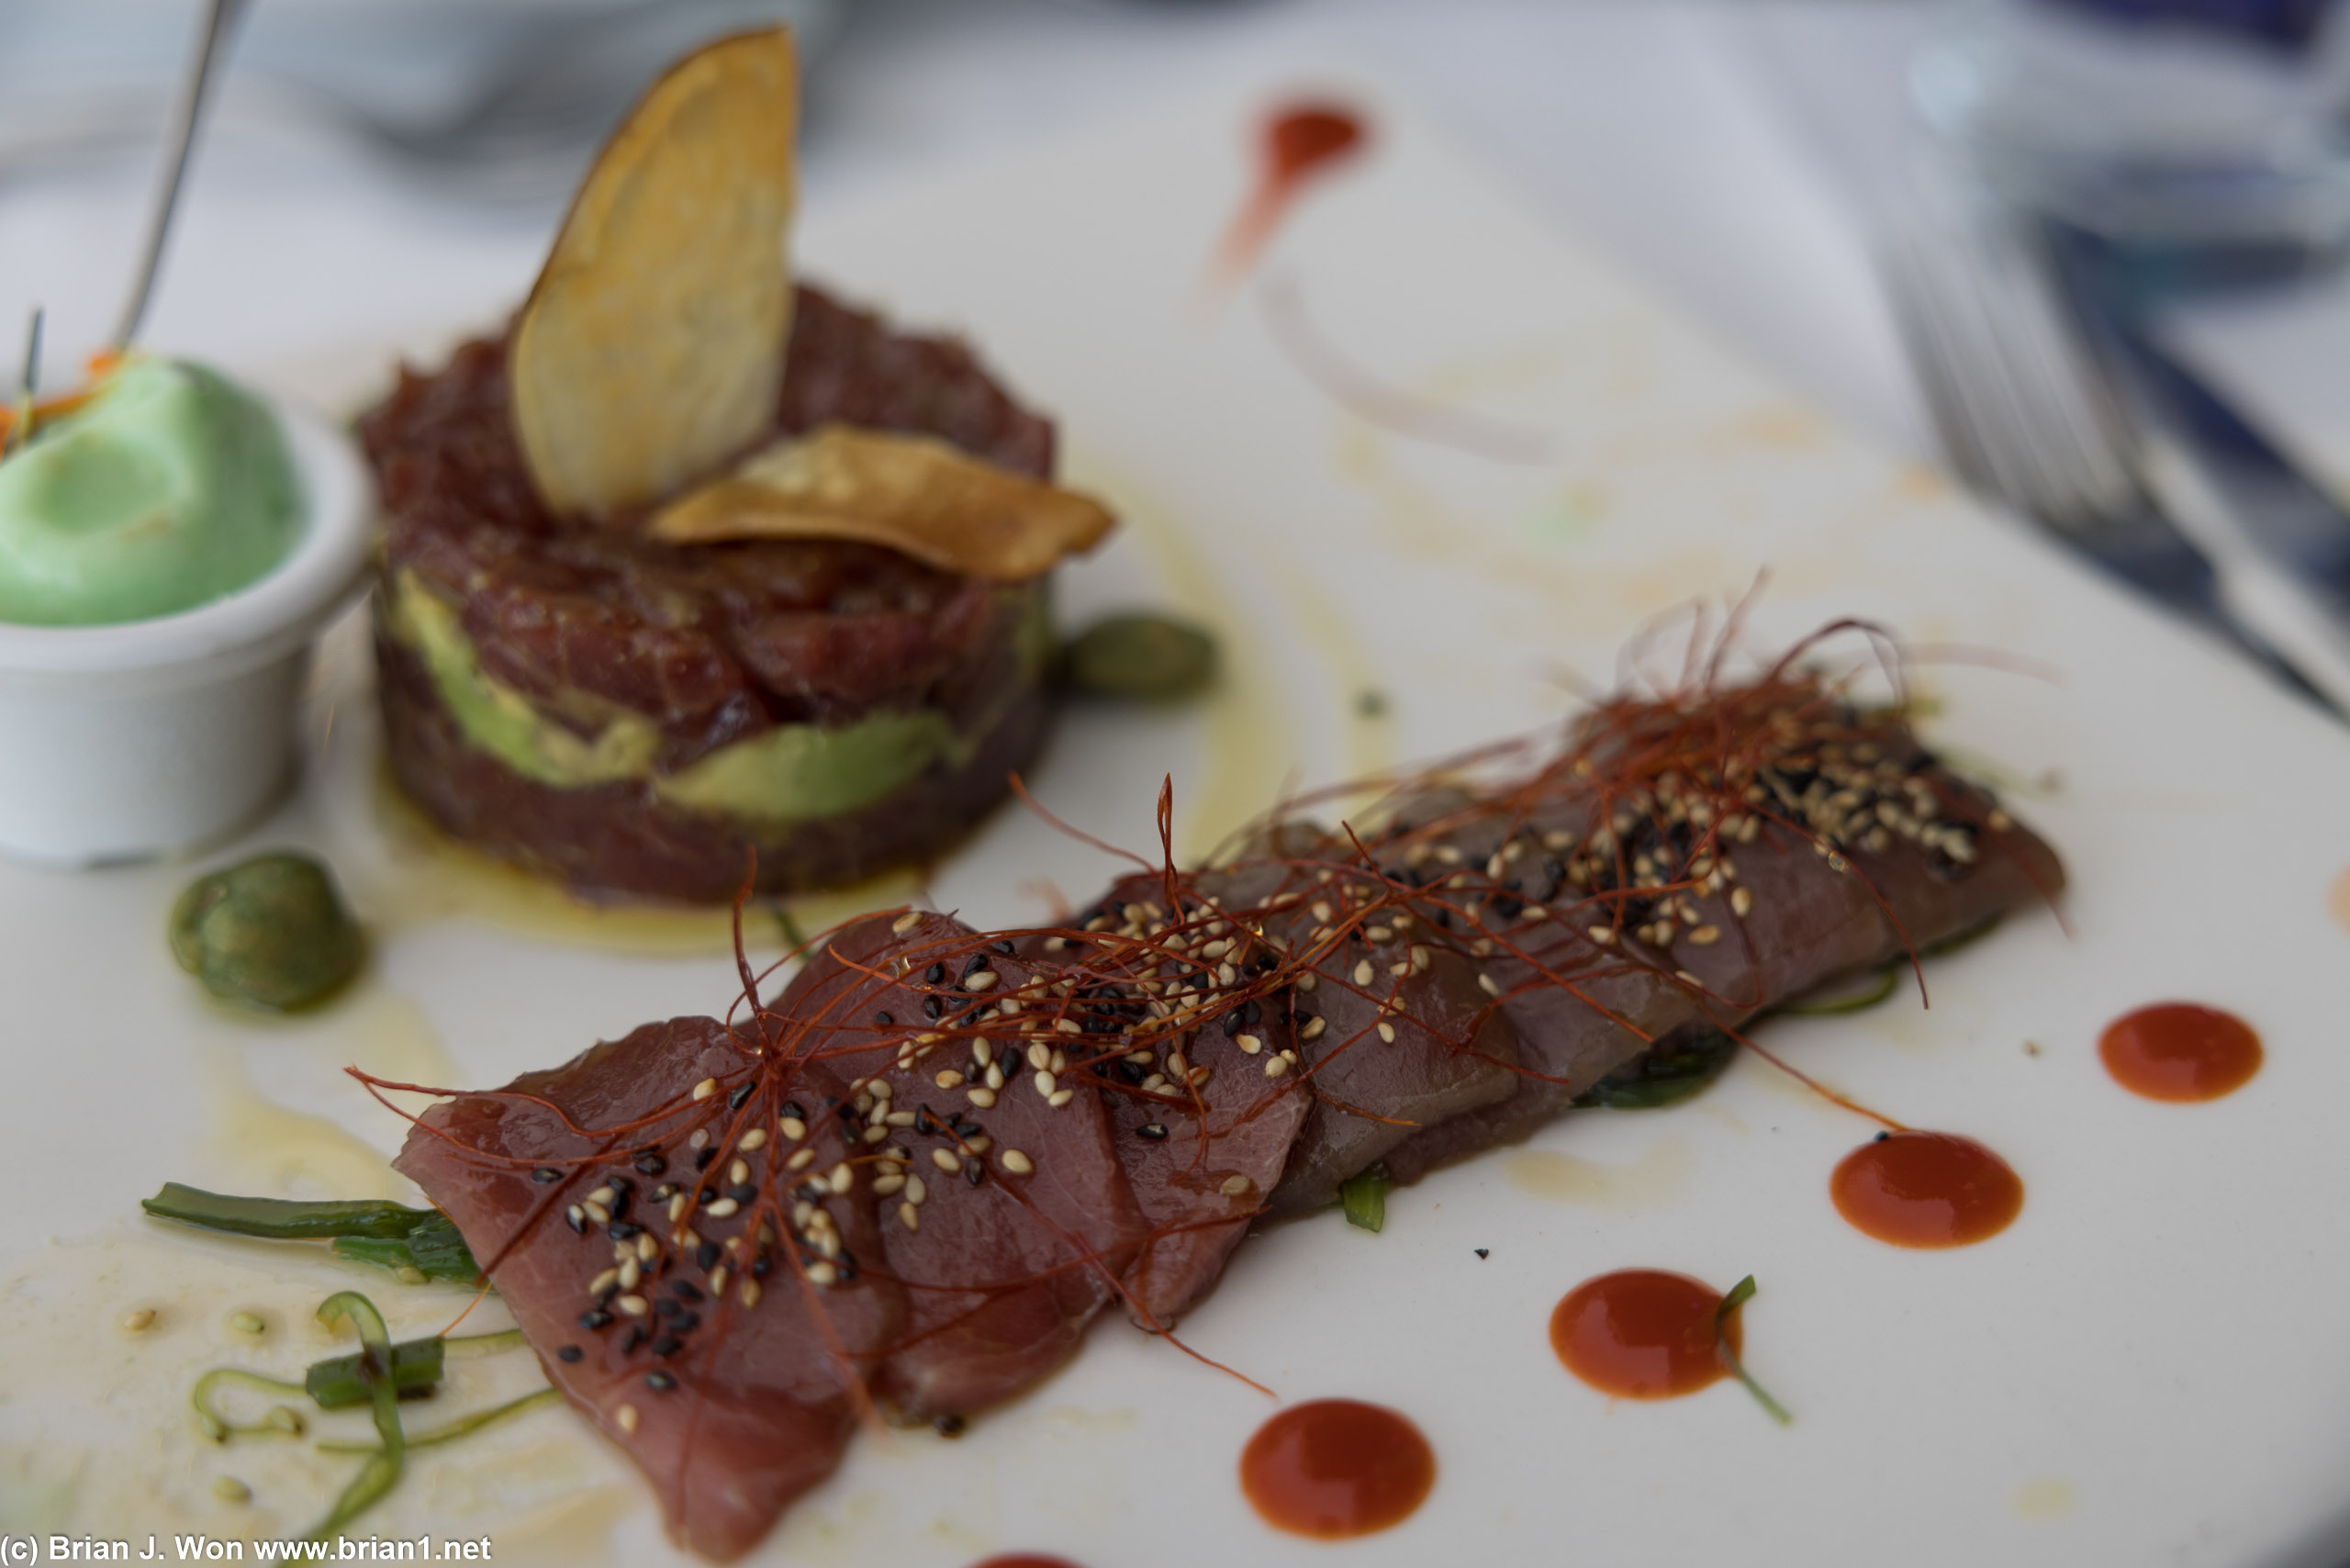 Tuna belly and tuna tartare, the latter again quite substantial with the avocado paste.